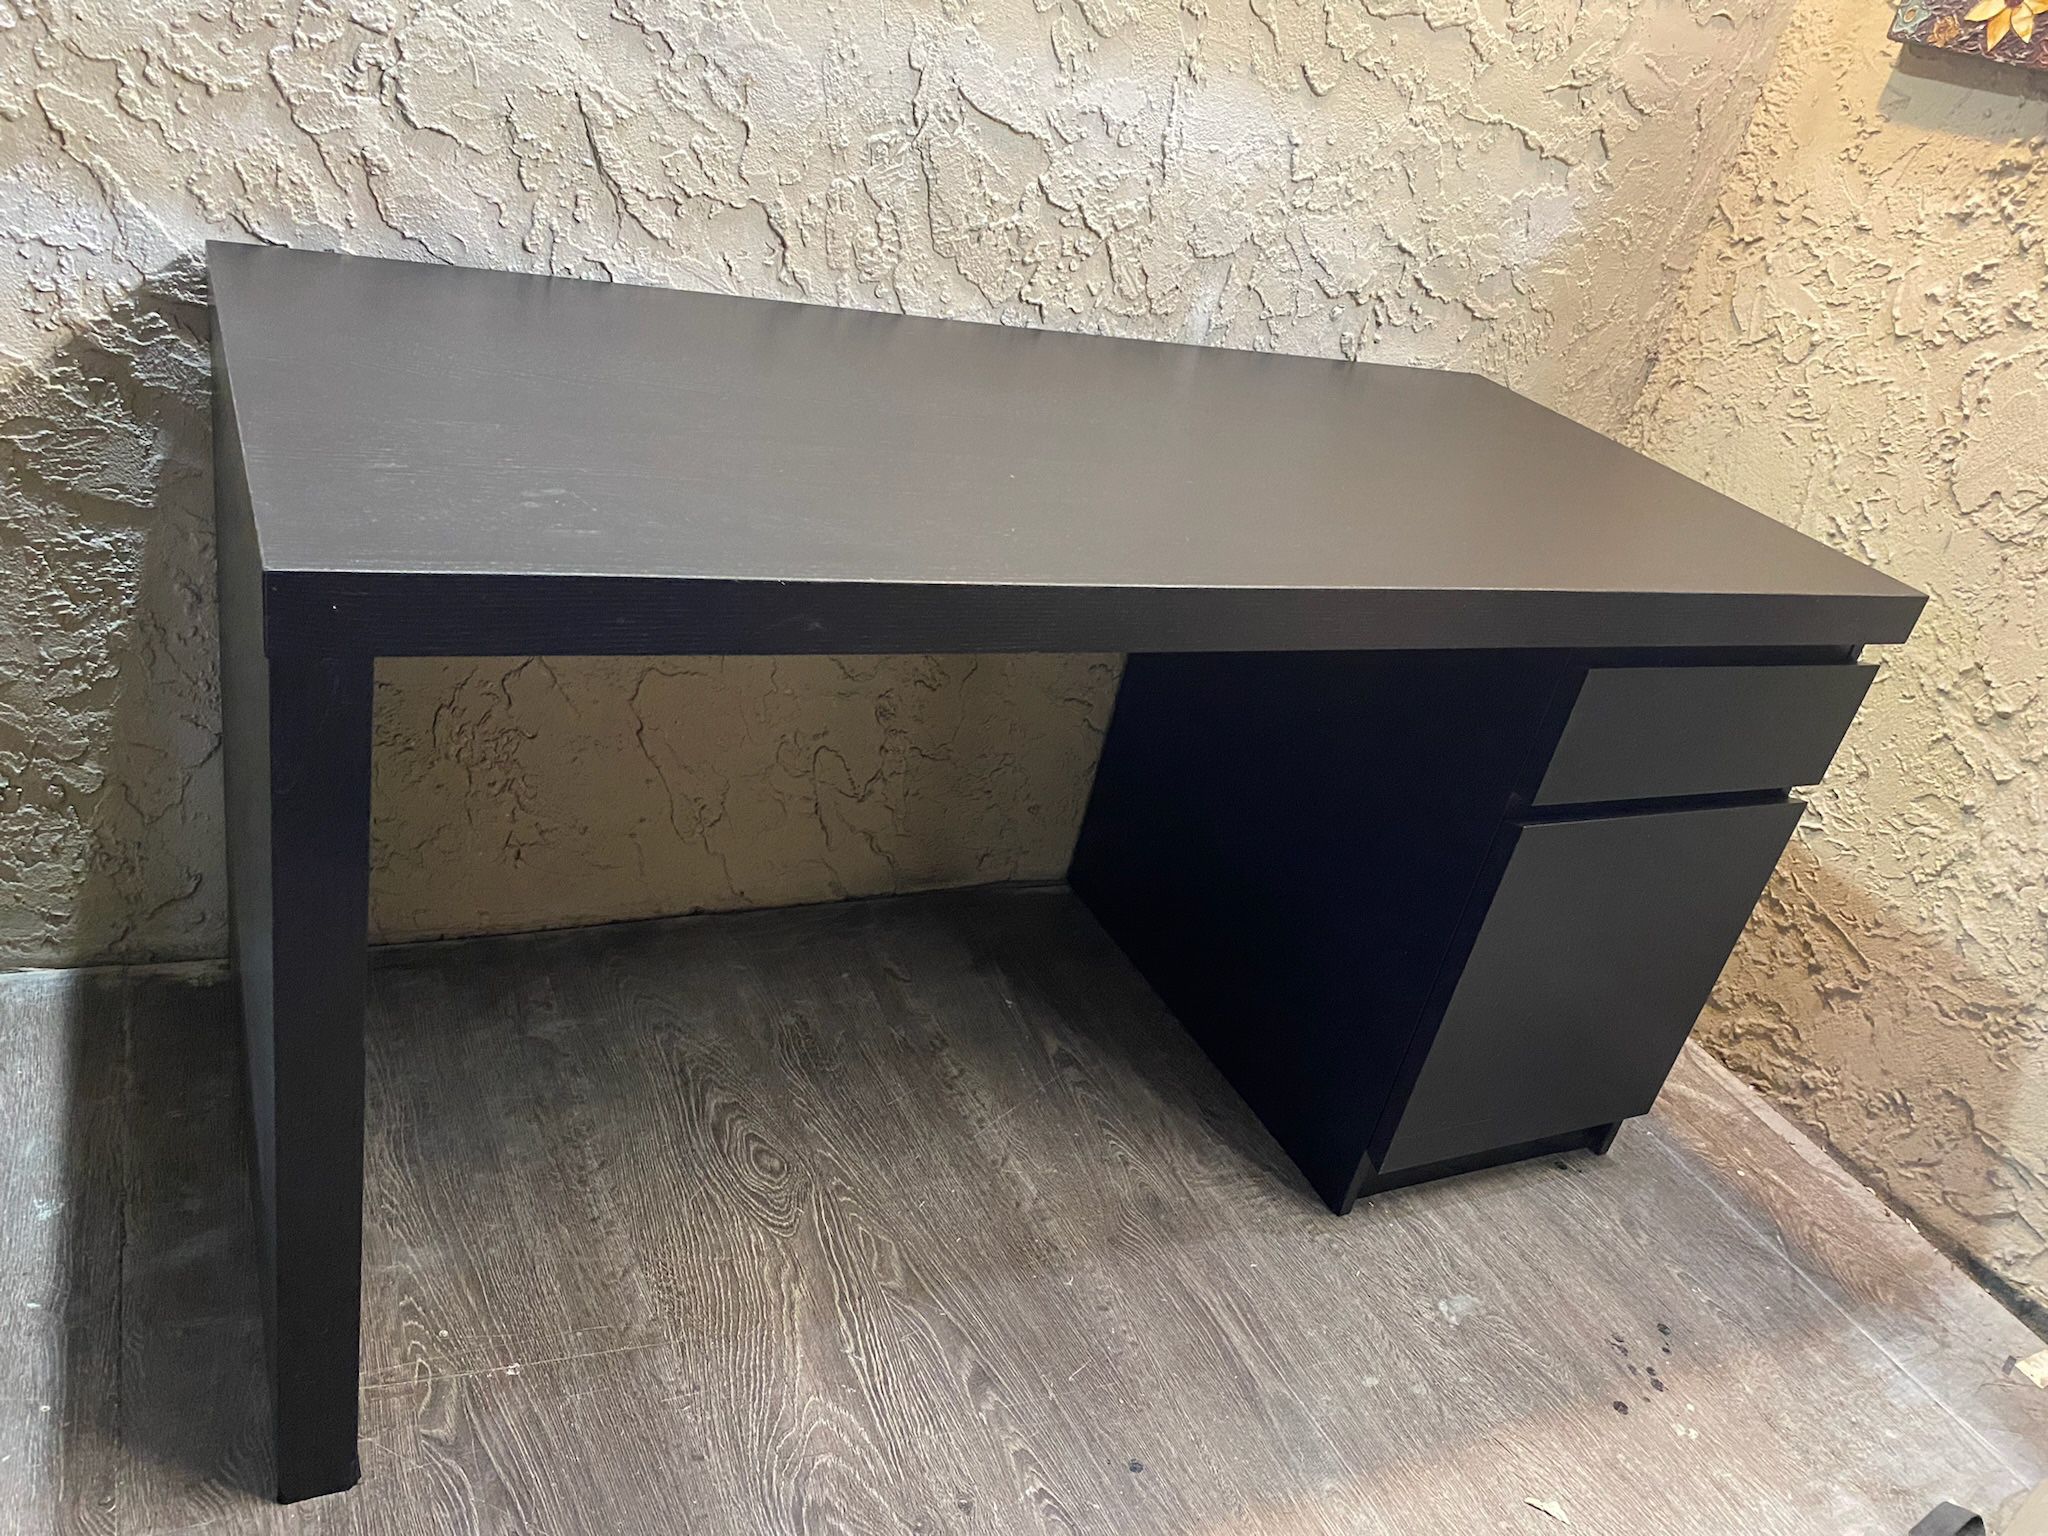 IKEA Malm Black Brown Desk - Delivery Available for an Additional Fee - See My Other Items 😀